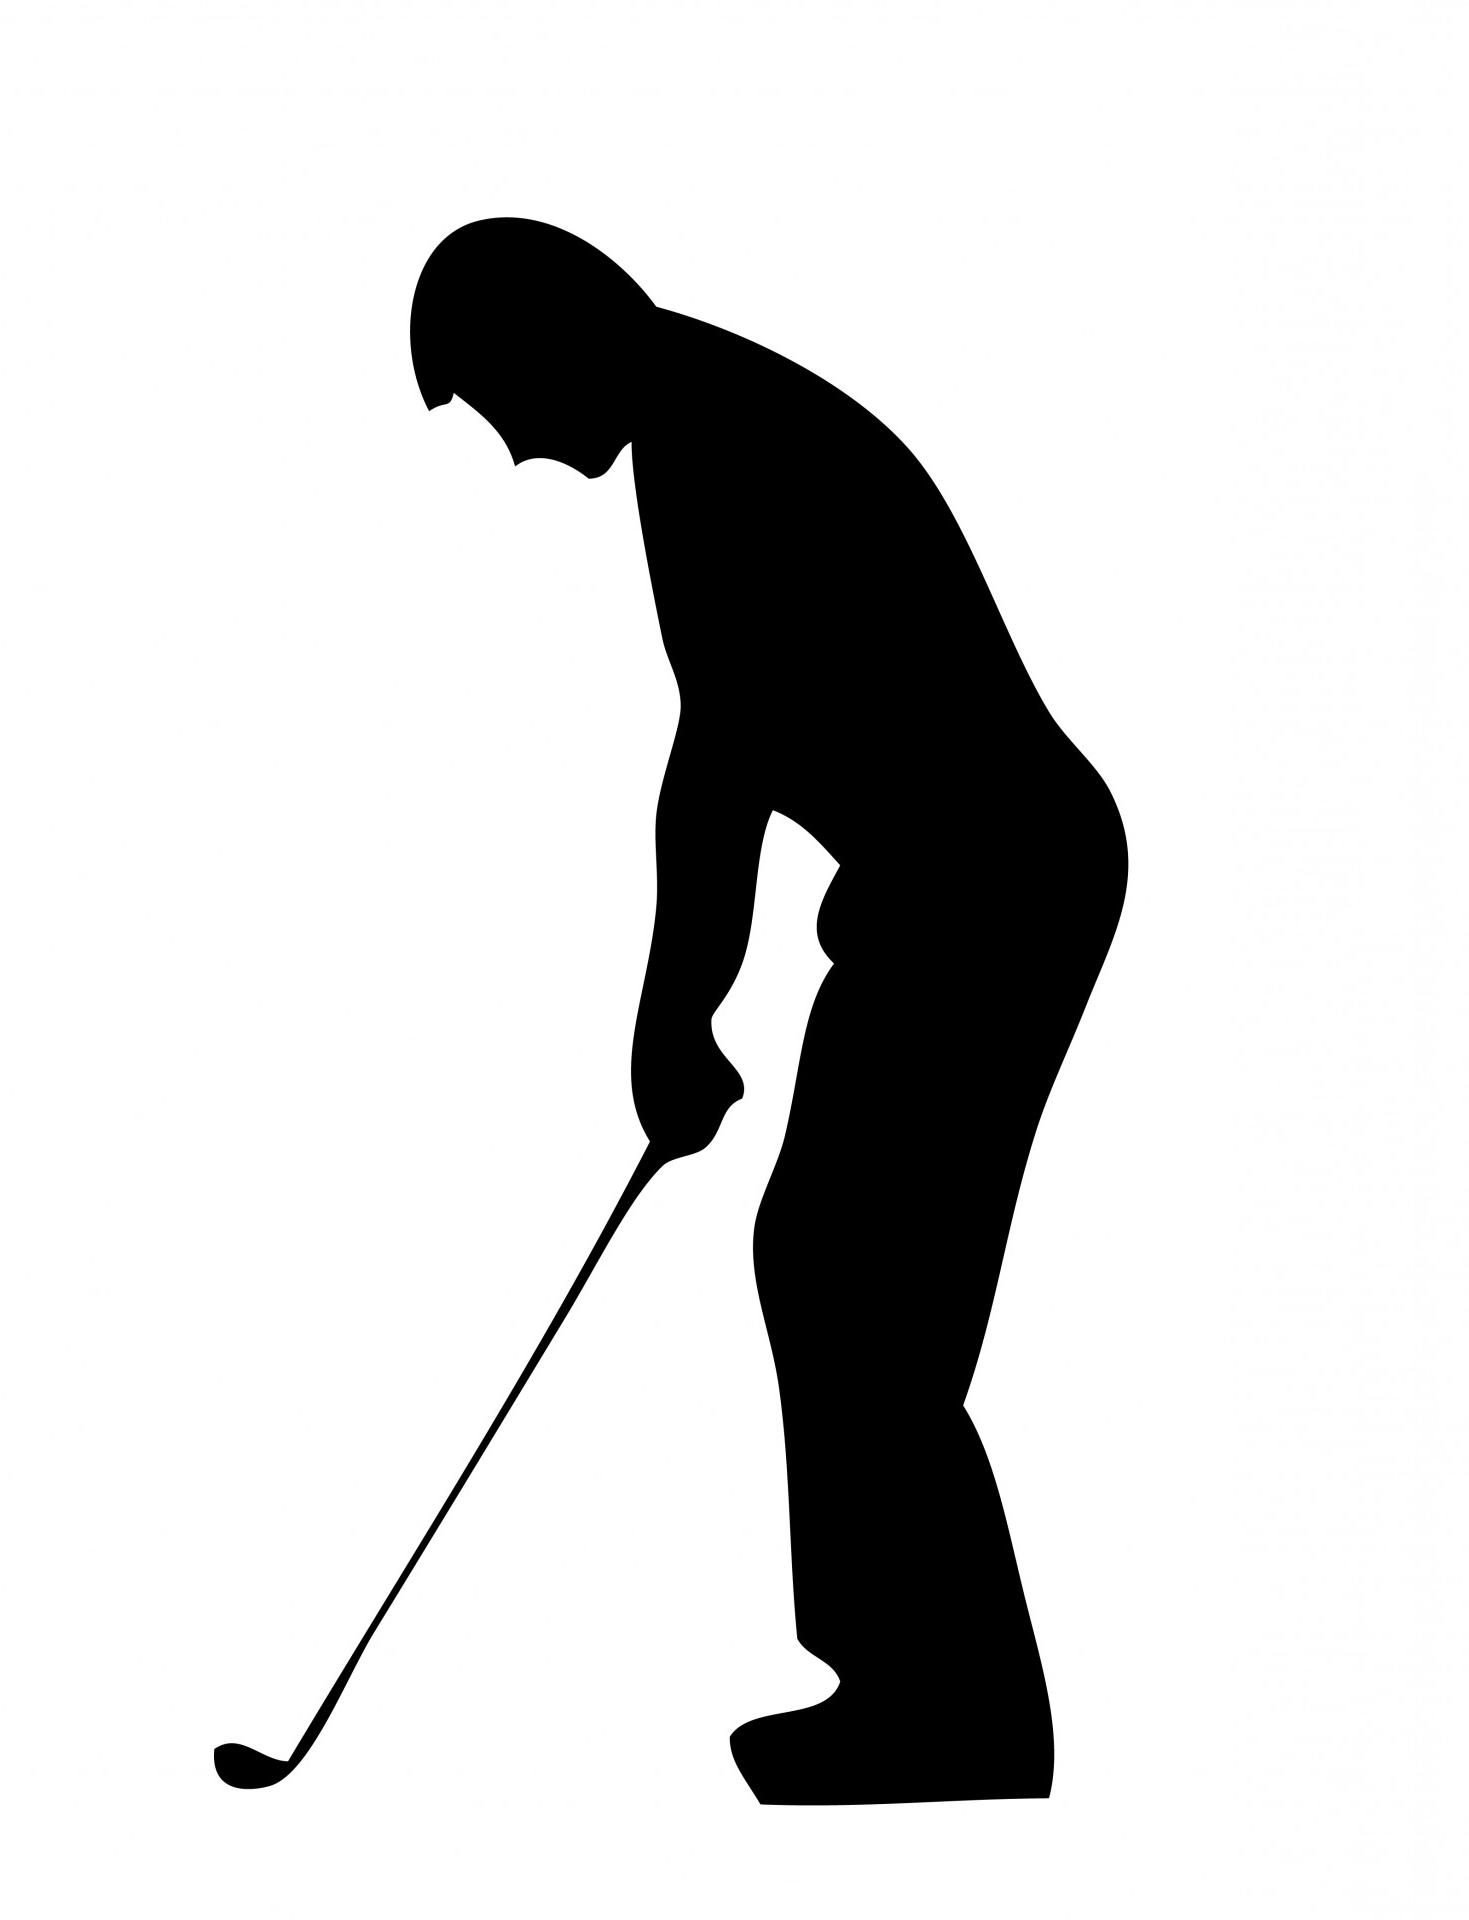 Golf Silhouette Vector Free at GetDrawings Free download